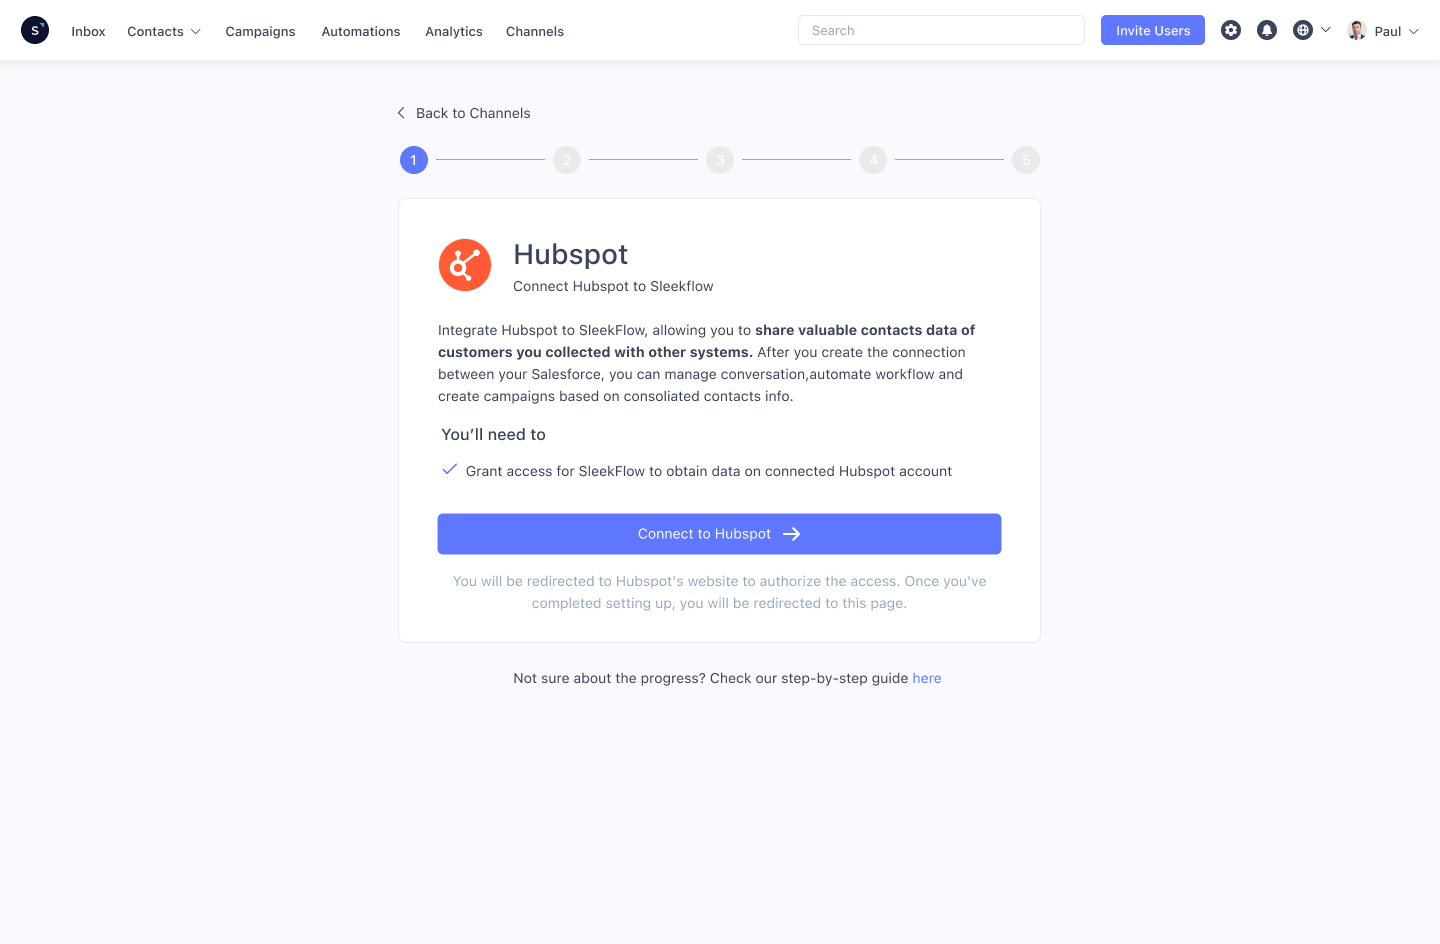 How to connect Hubspot and SleekFlow